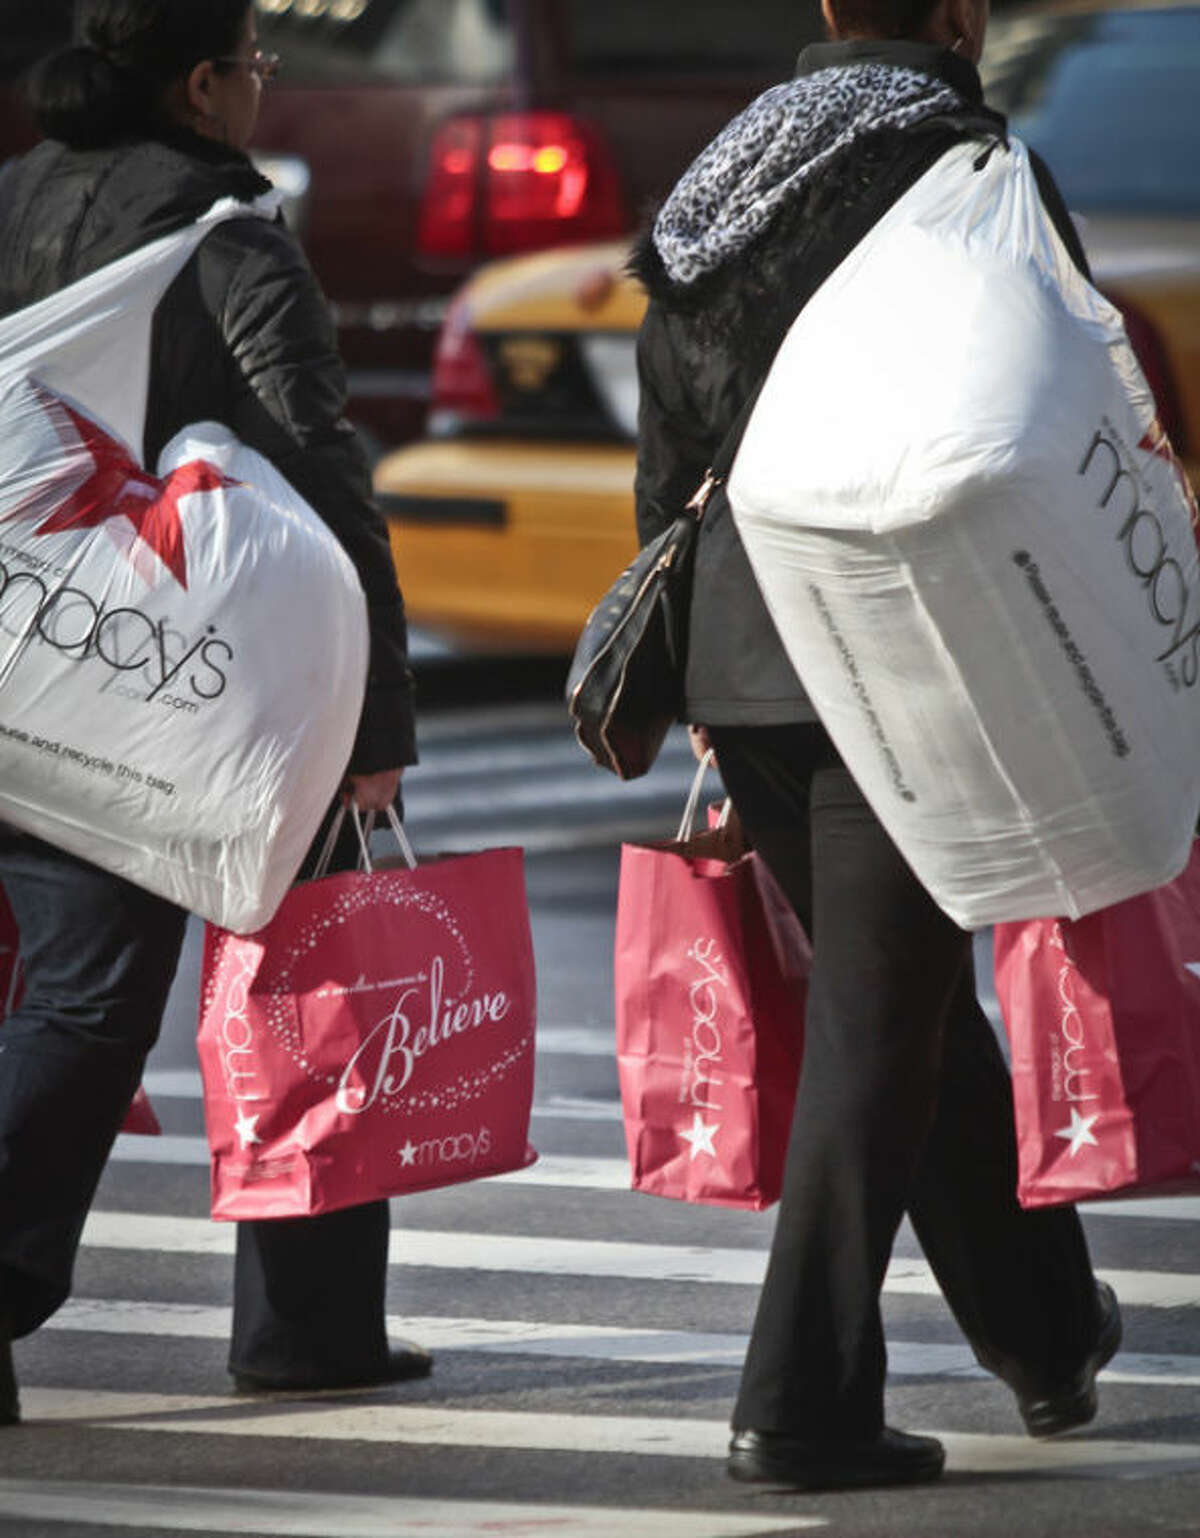 Shoppers carry Macy's bags while crossing an intersection outside Macy's on Saturday, Nov. 23, 2013, in New York. (AP Photo/Bebeto Matthews)